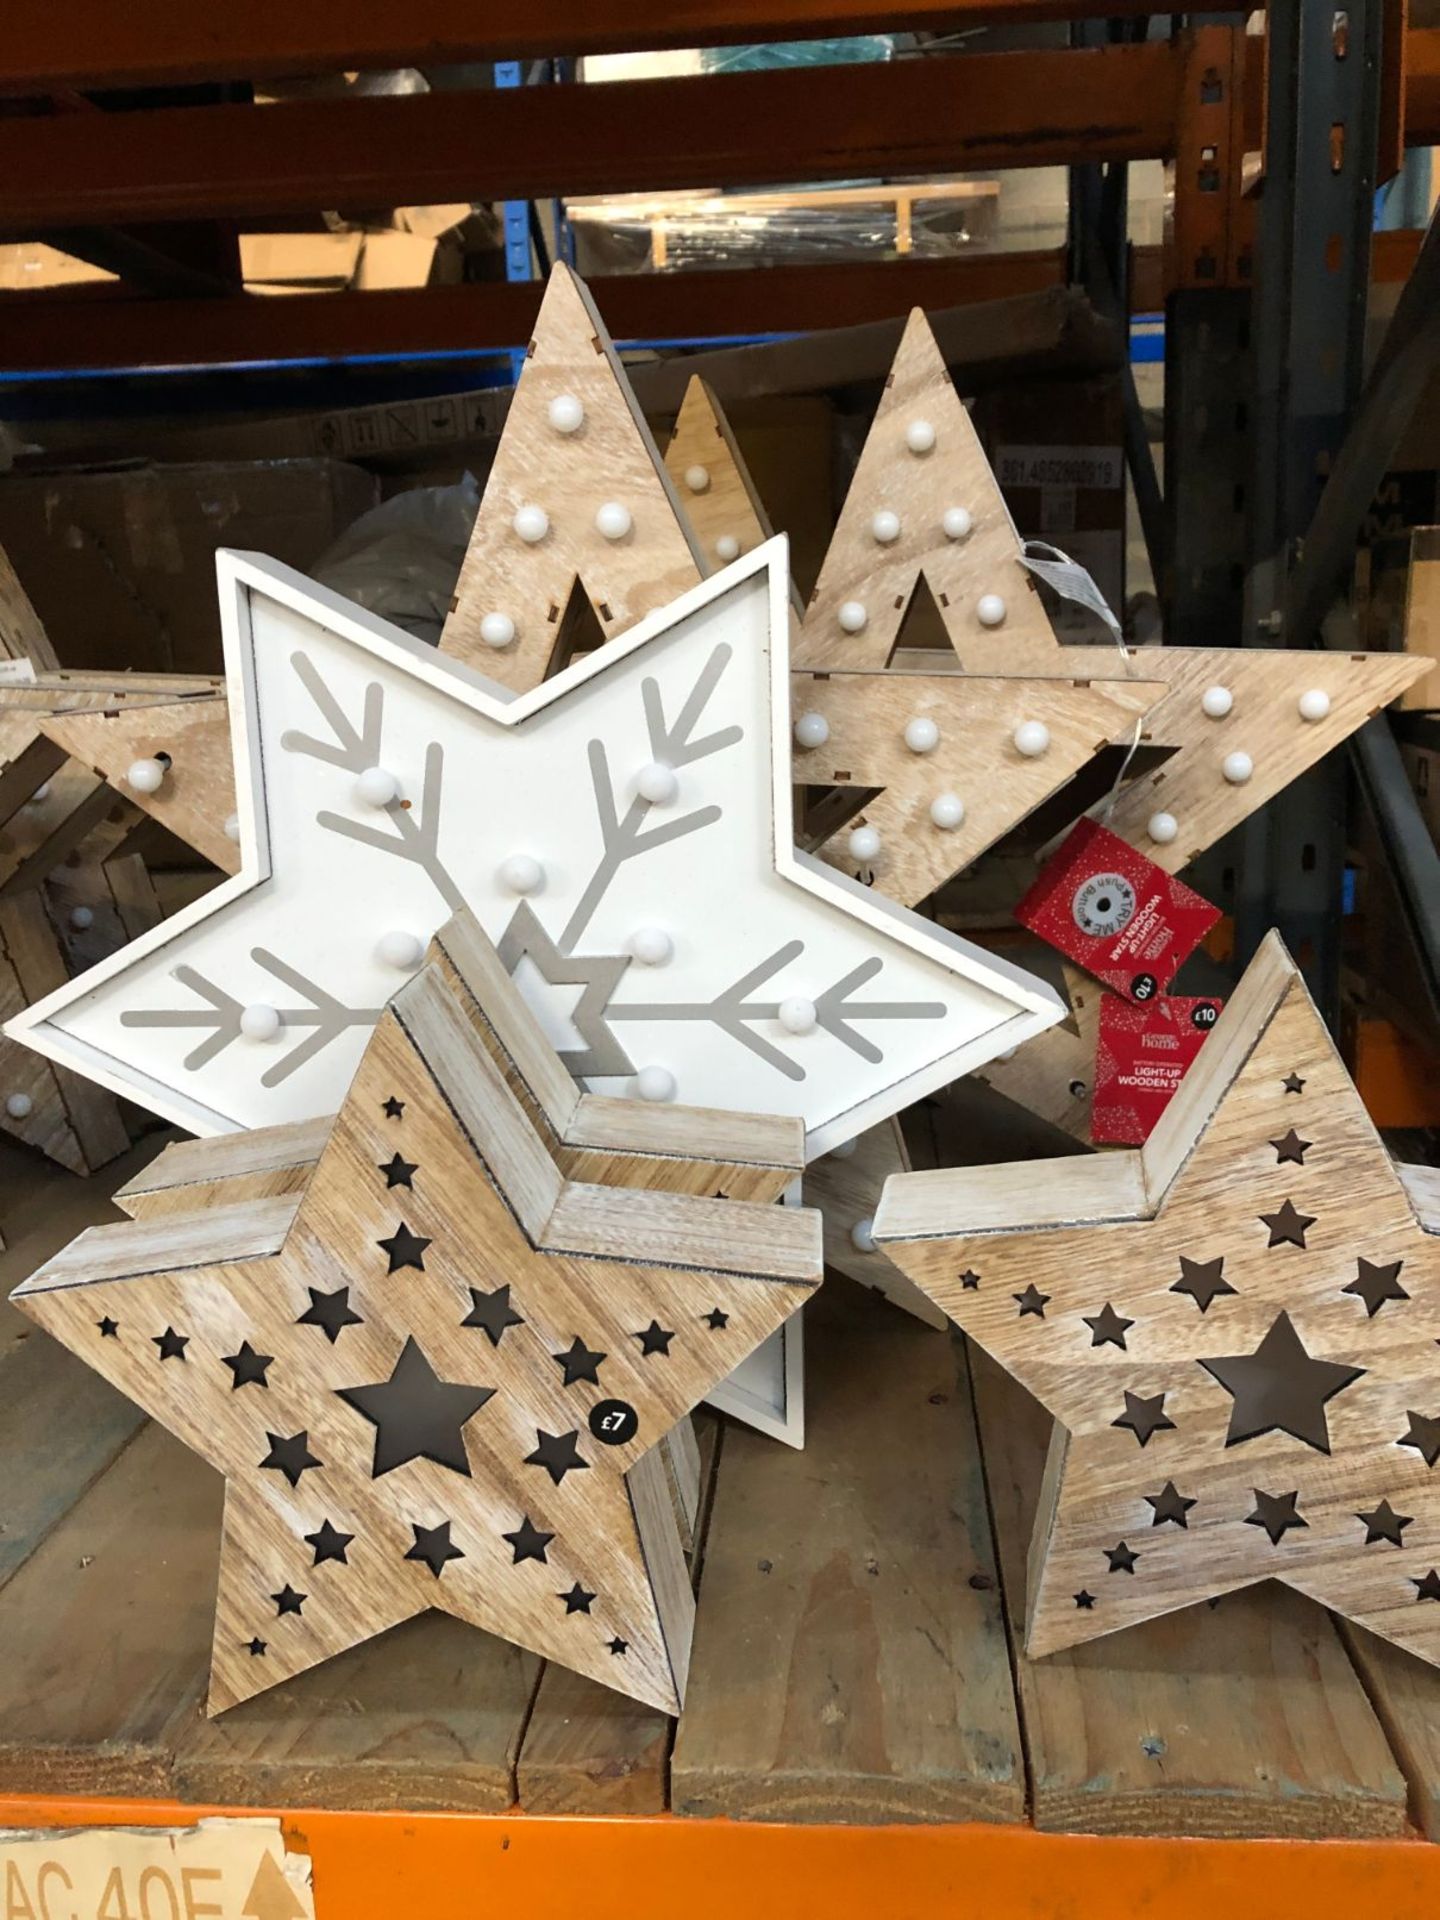 7 X LIGHT-UP AND DECORATIVE STARS / COMBINED RRP £61.00 / CUSTOMER RETURNS (IMAGES ARE FOR